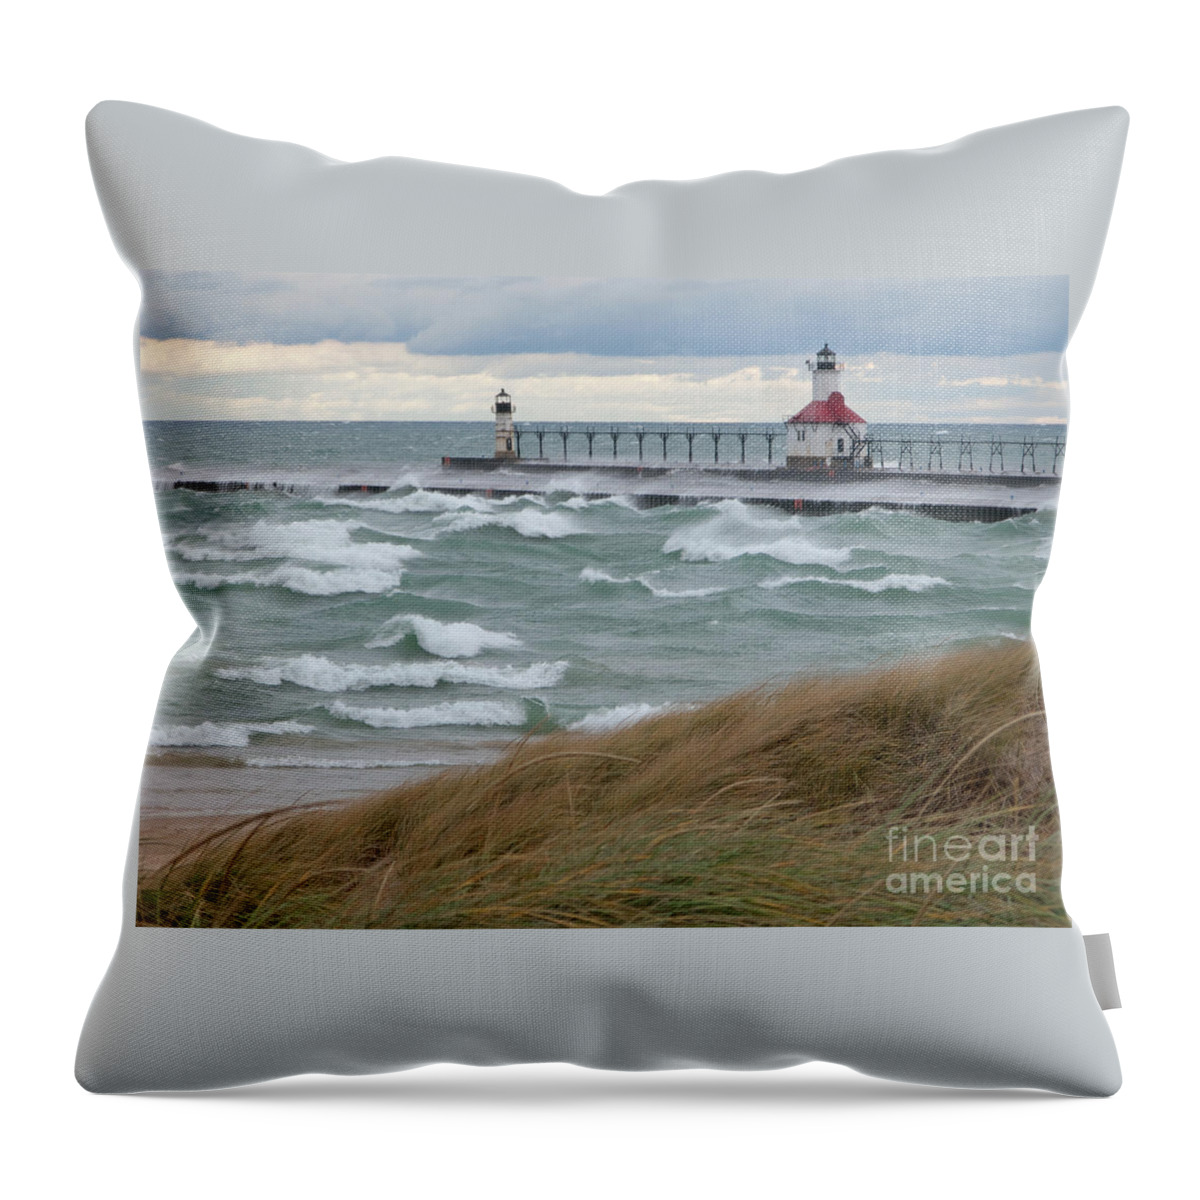 Lake Michigan Throw Pillow featuring the photograph Lake Michigan Winds by Ann Horn